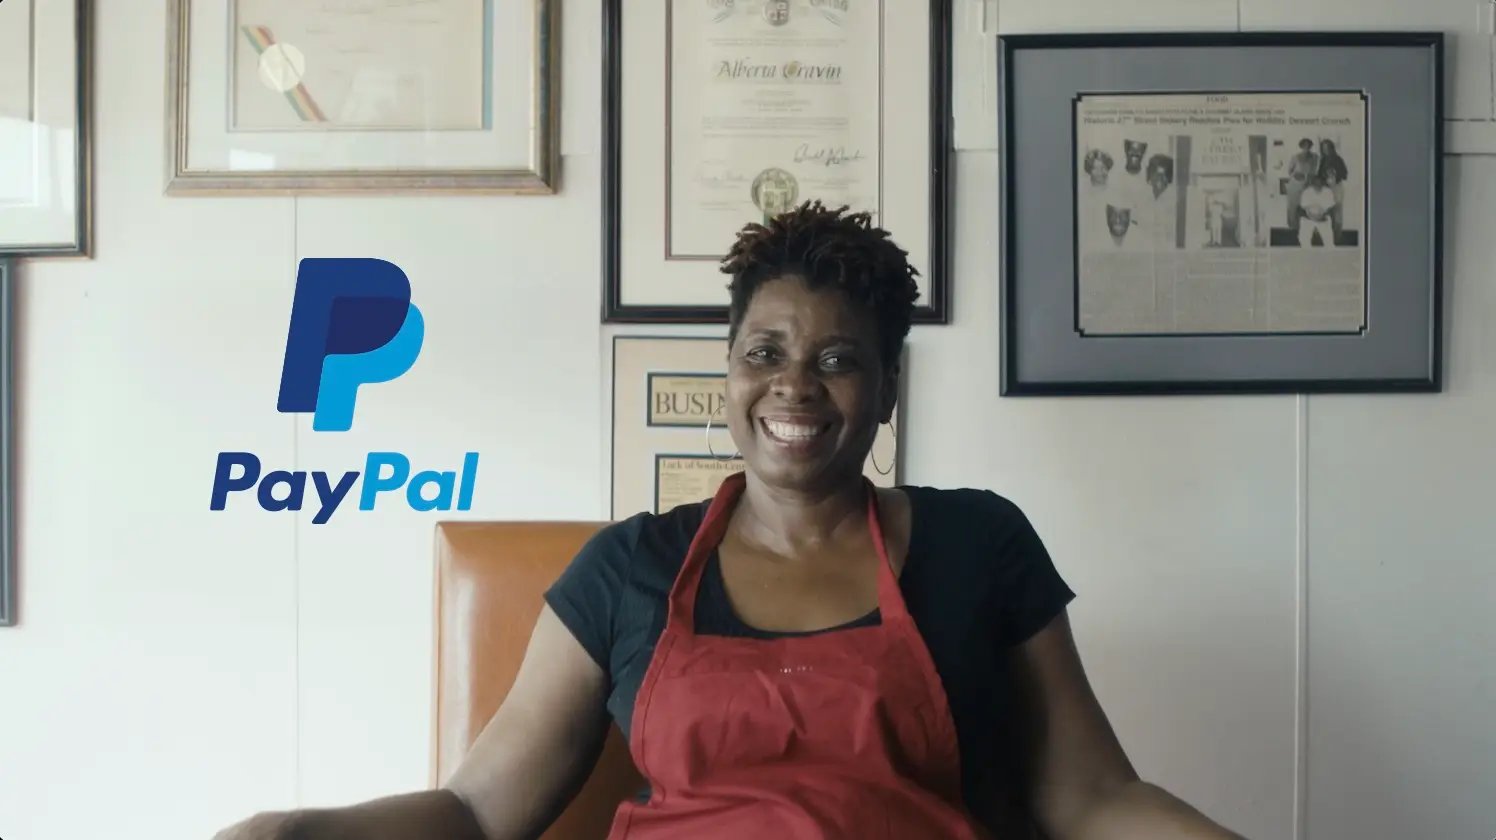 A smiling person wearing a red apron sitting in a room with framed certificates on the wall, displaying the PayPal logo on the left side, as part of a video content case study.